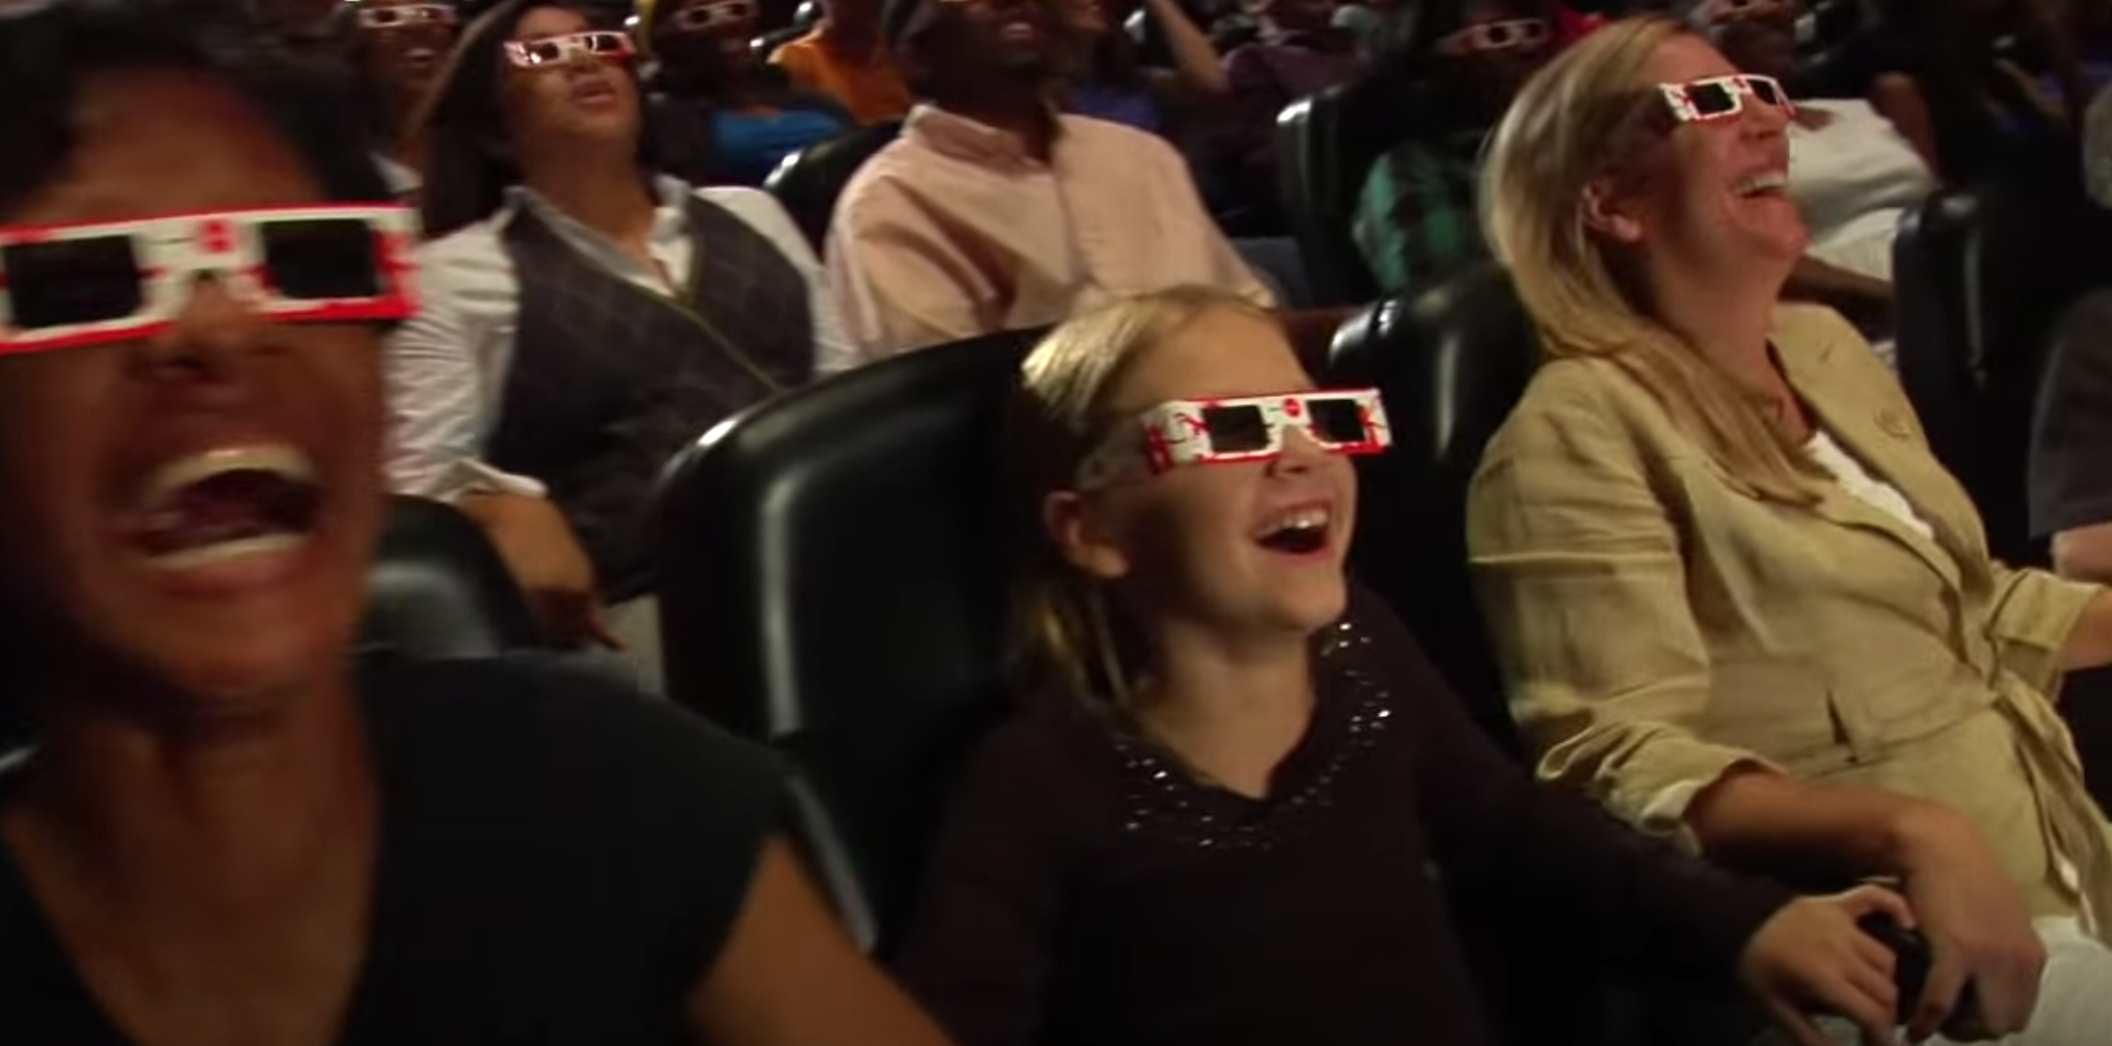 Audience members at the World of Coca-Cola wear 3-D glasses while watching a video.